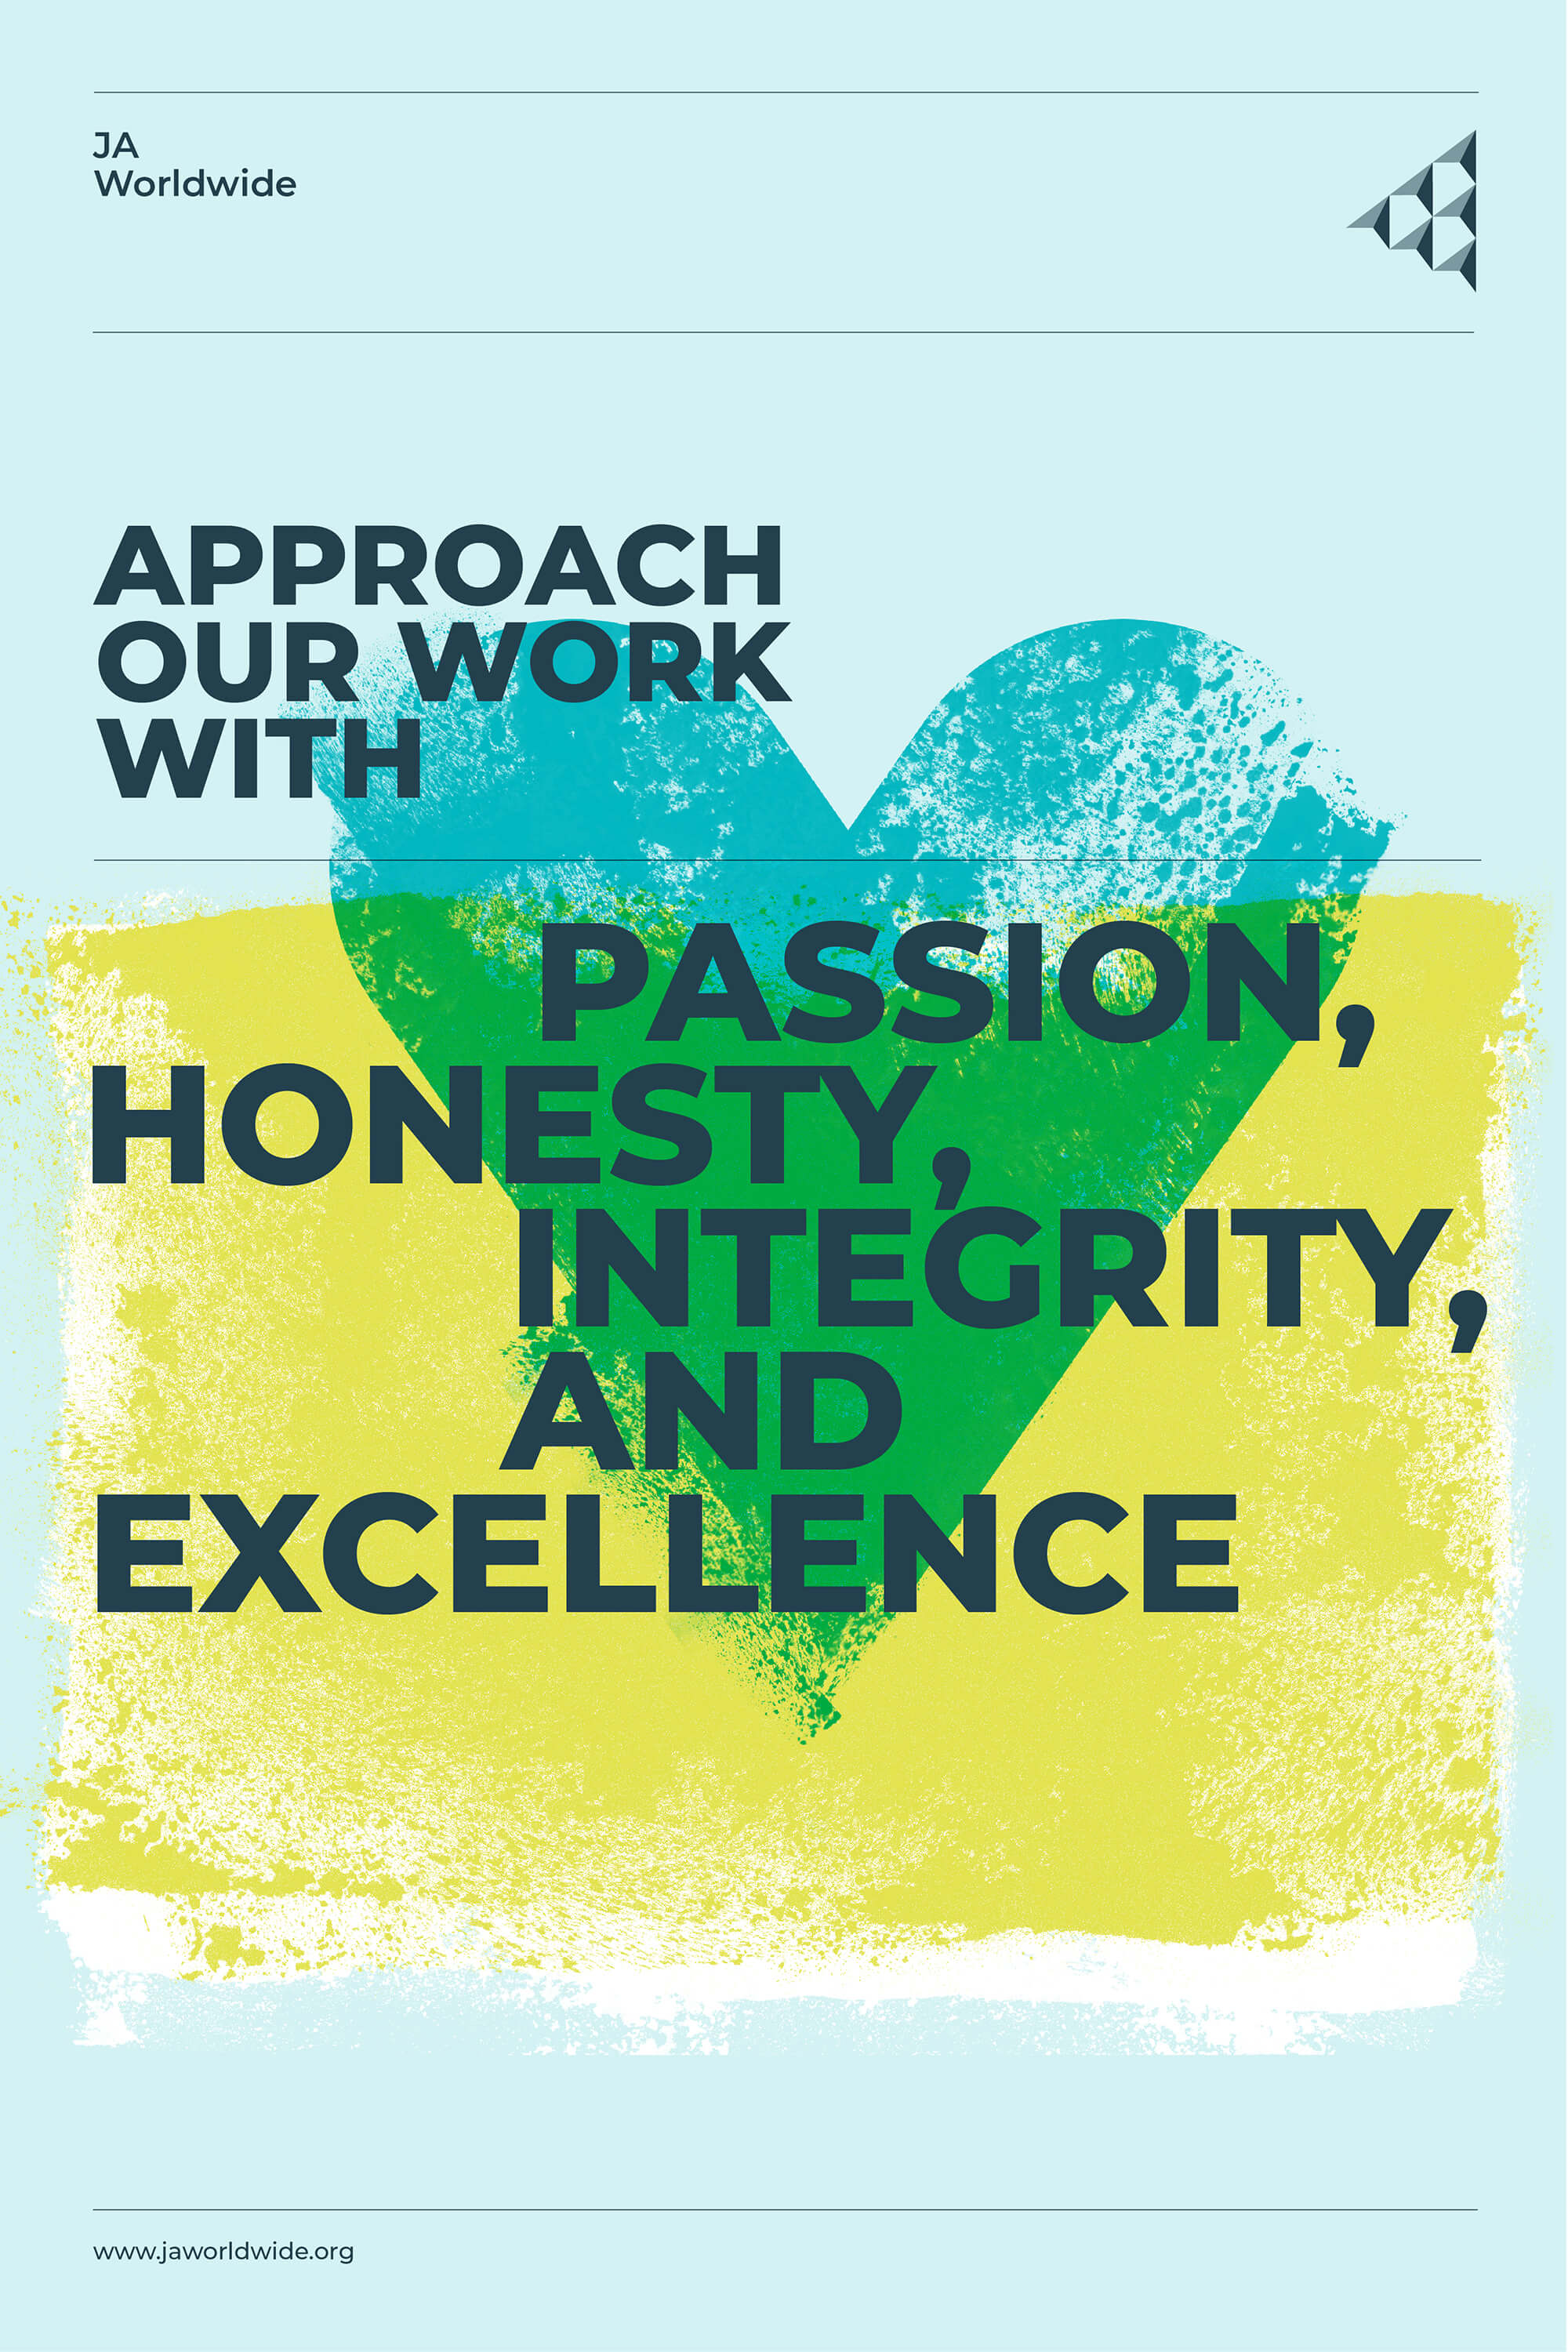 Approach our work with passion, honesty, intergrity, and excellence